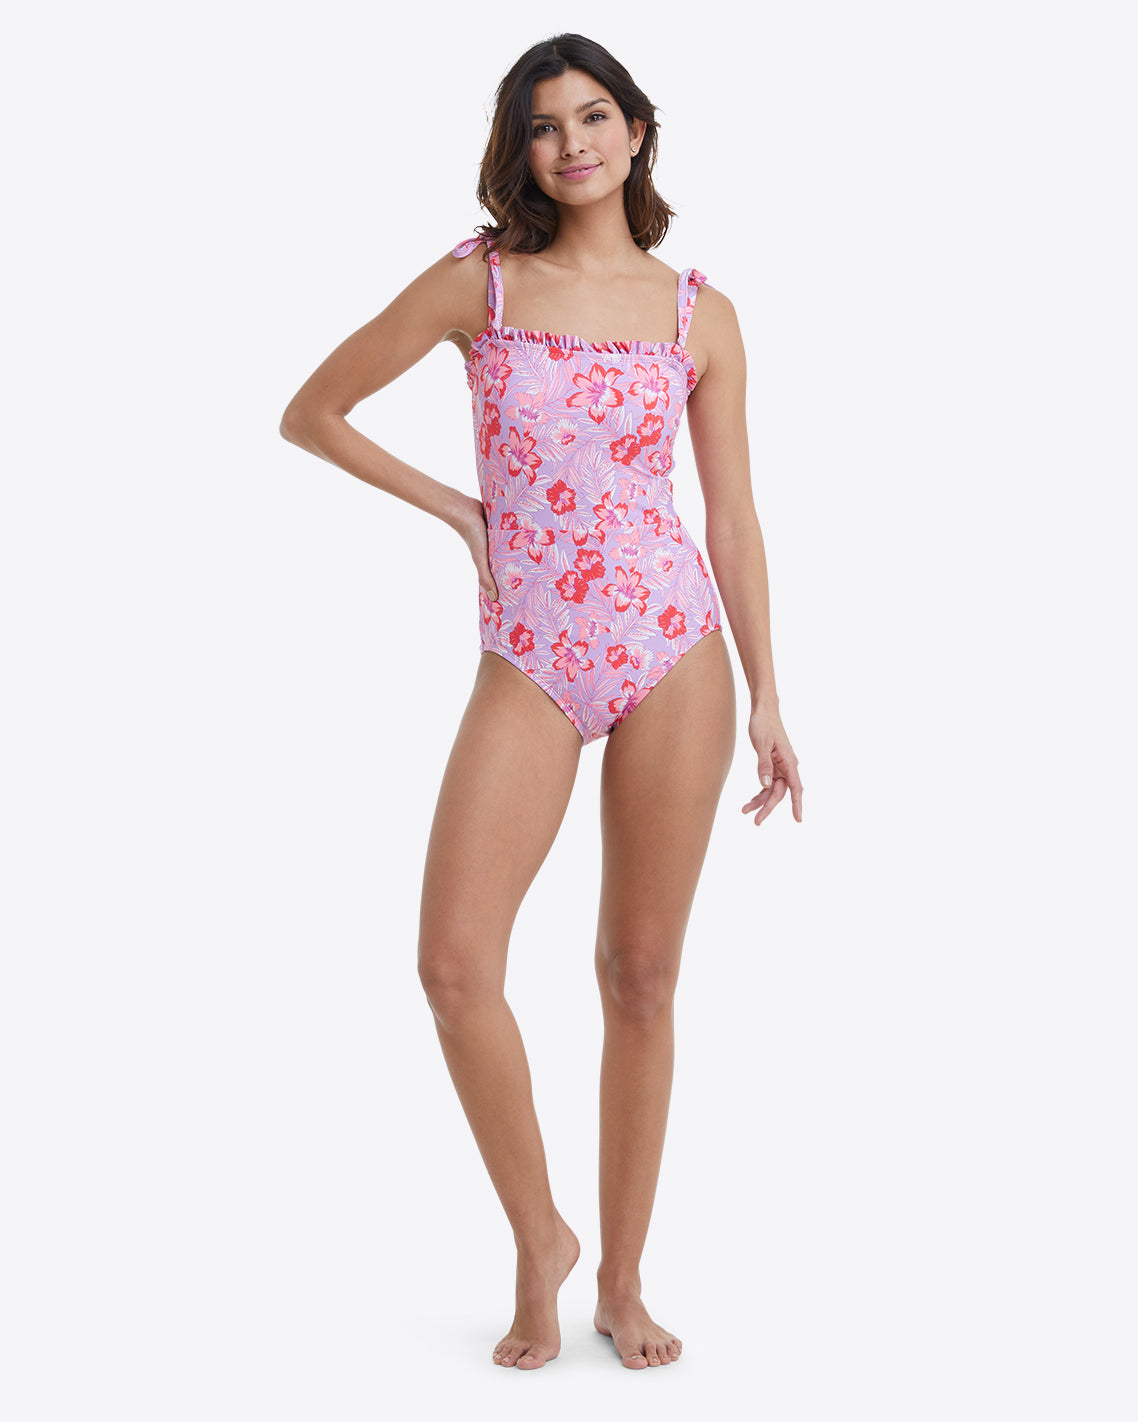 Ruffled One Piece Swimsuit in Floral Scallop